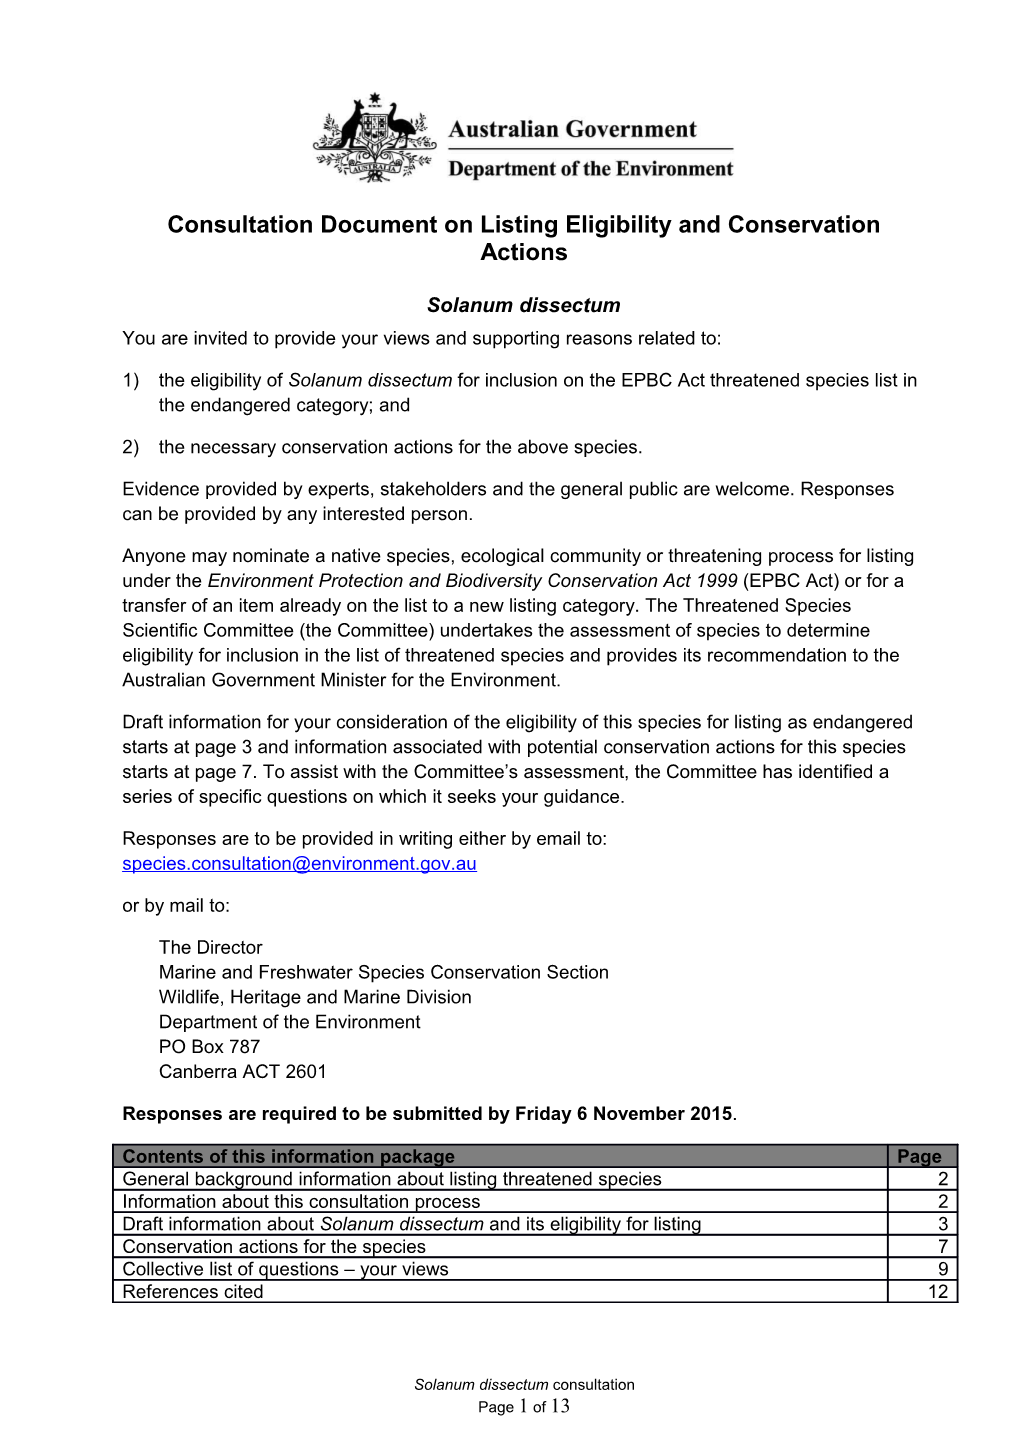 Consultation Document on Listing Eligibility and Conservation Actions Solanum Dissectum